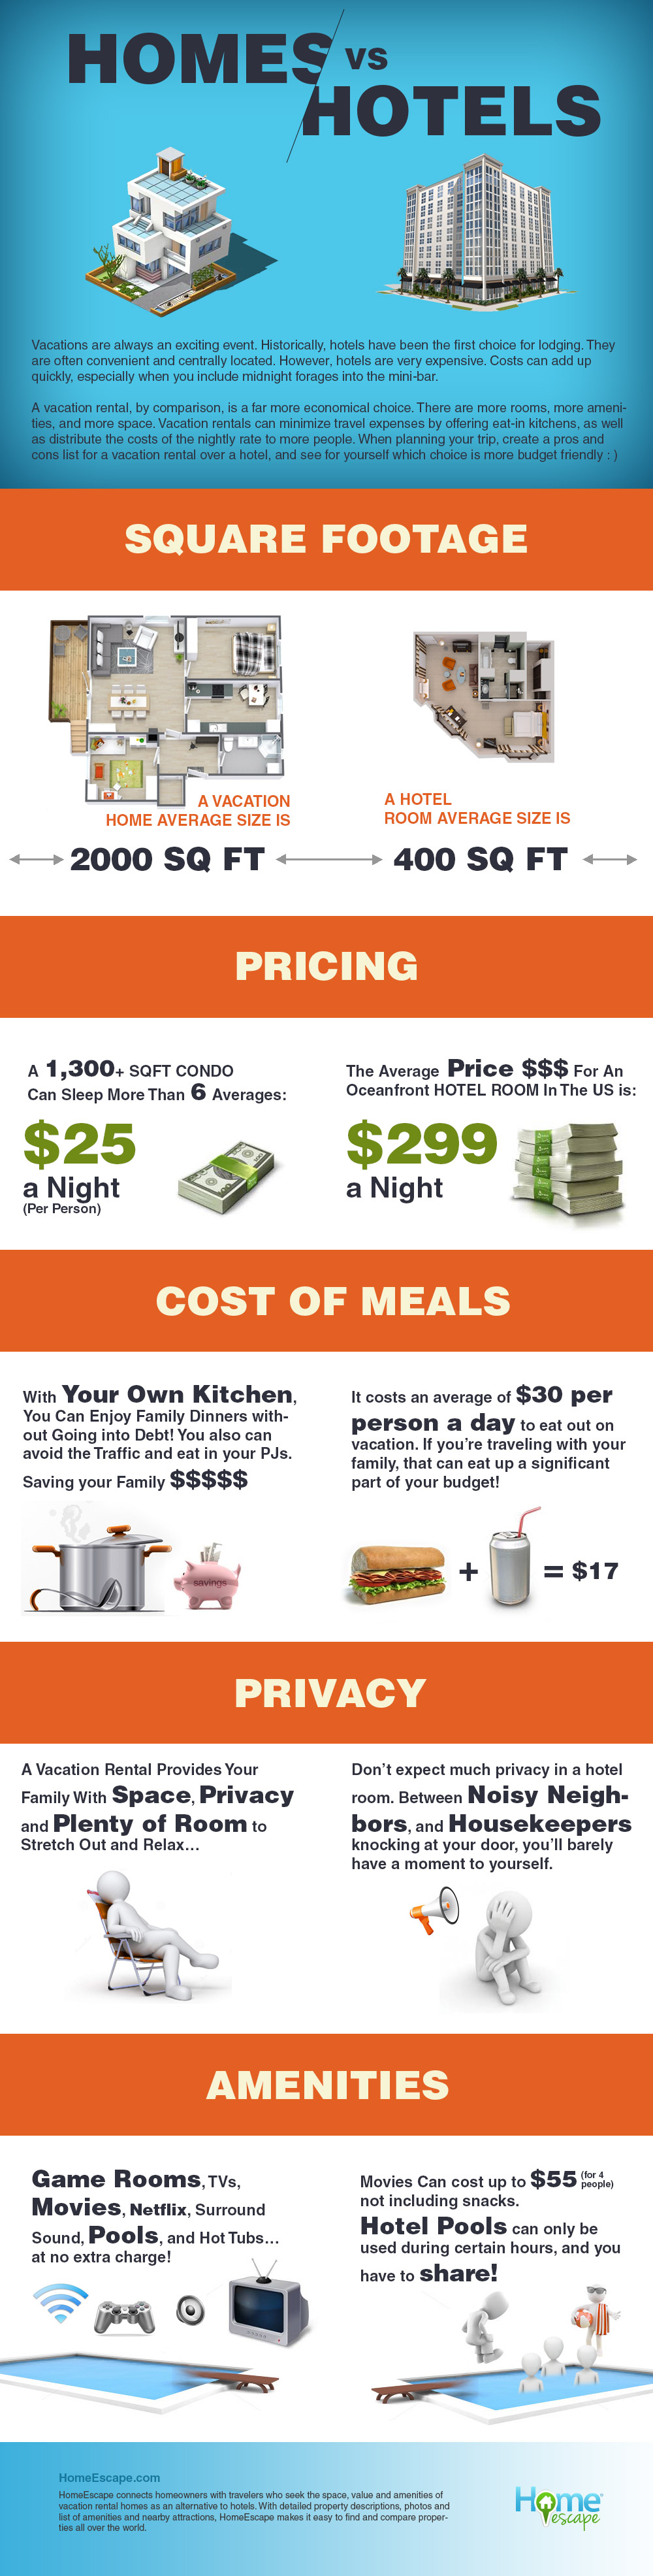 Homes Vs. Hotels Infographic